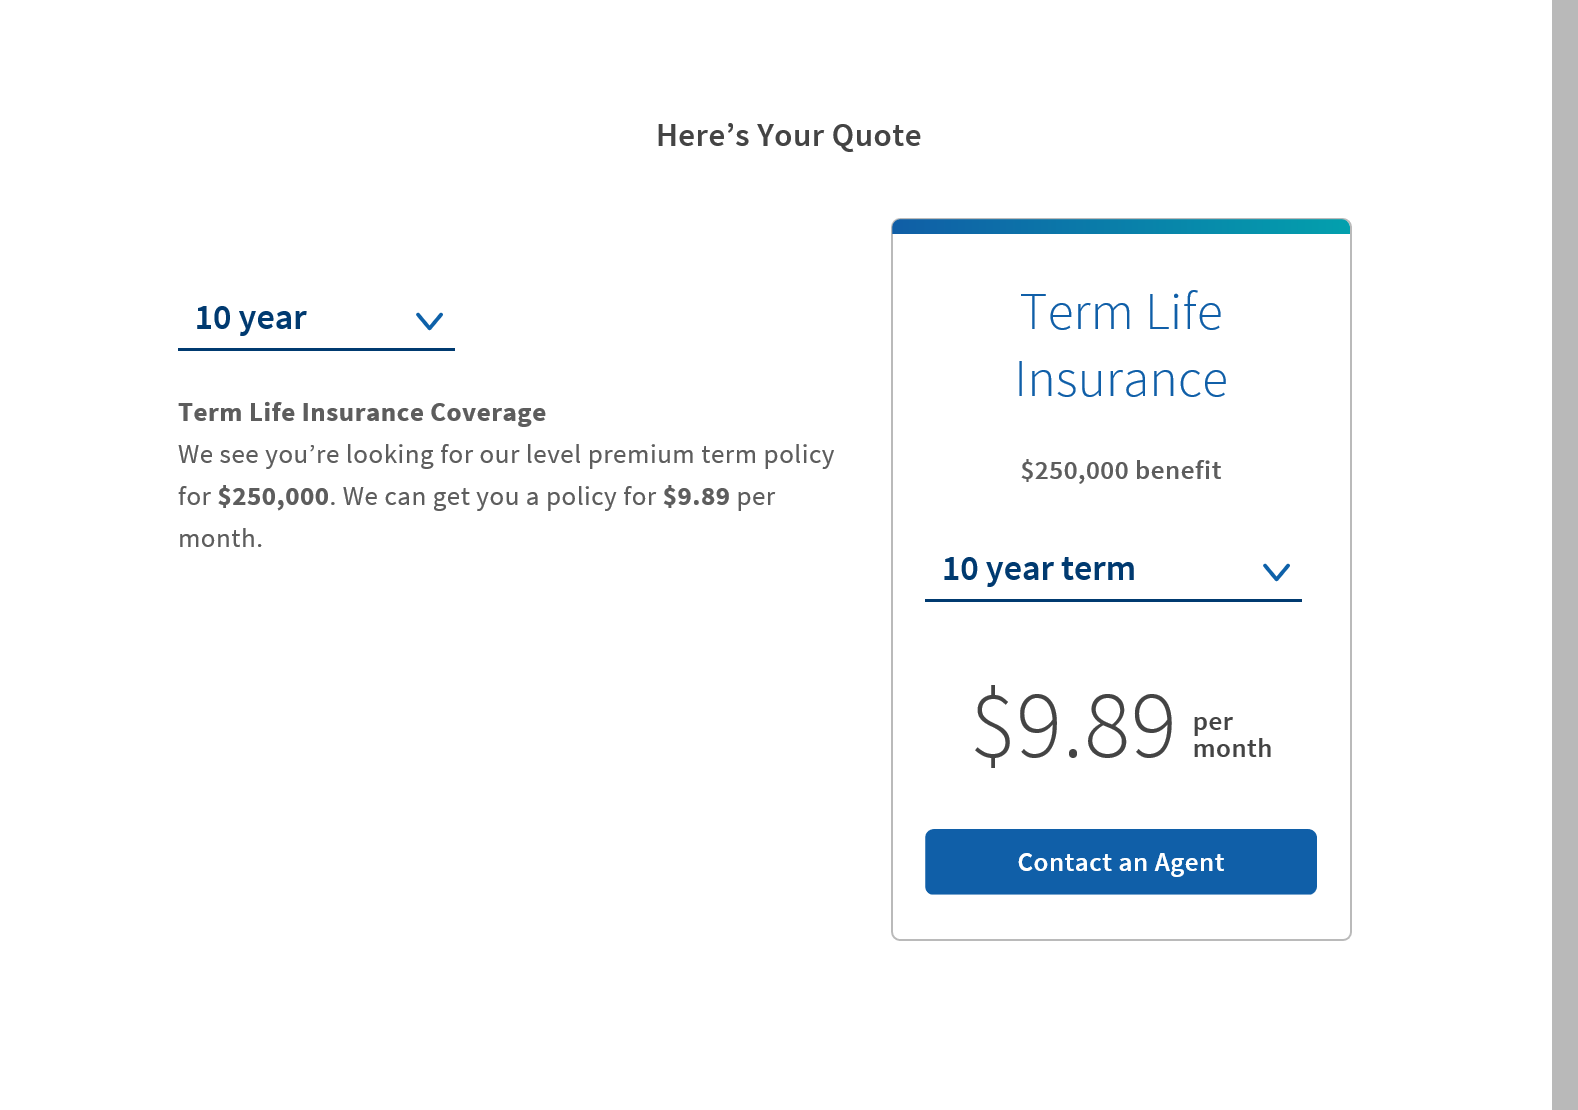 Mutual of Omaha Life Insurance Guide [Best Coverages + Rates]